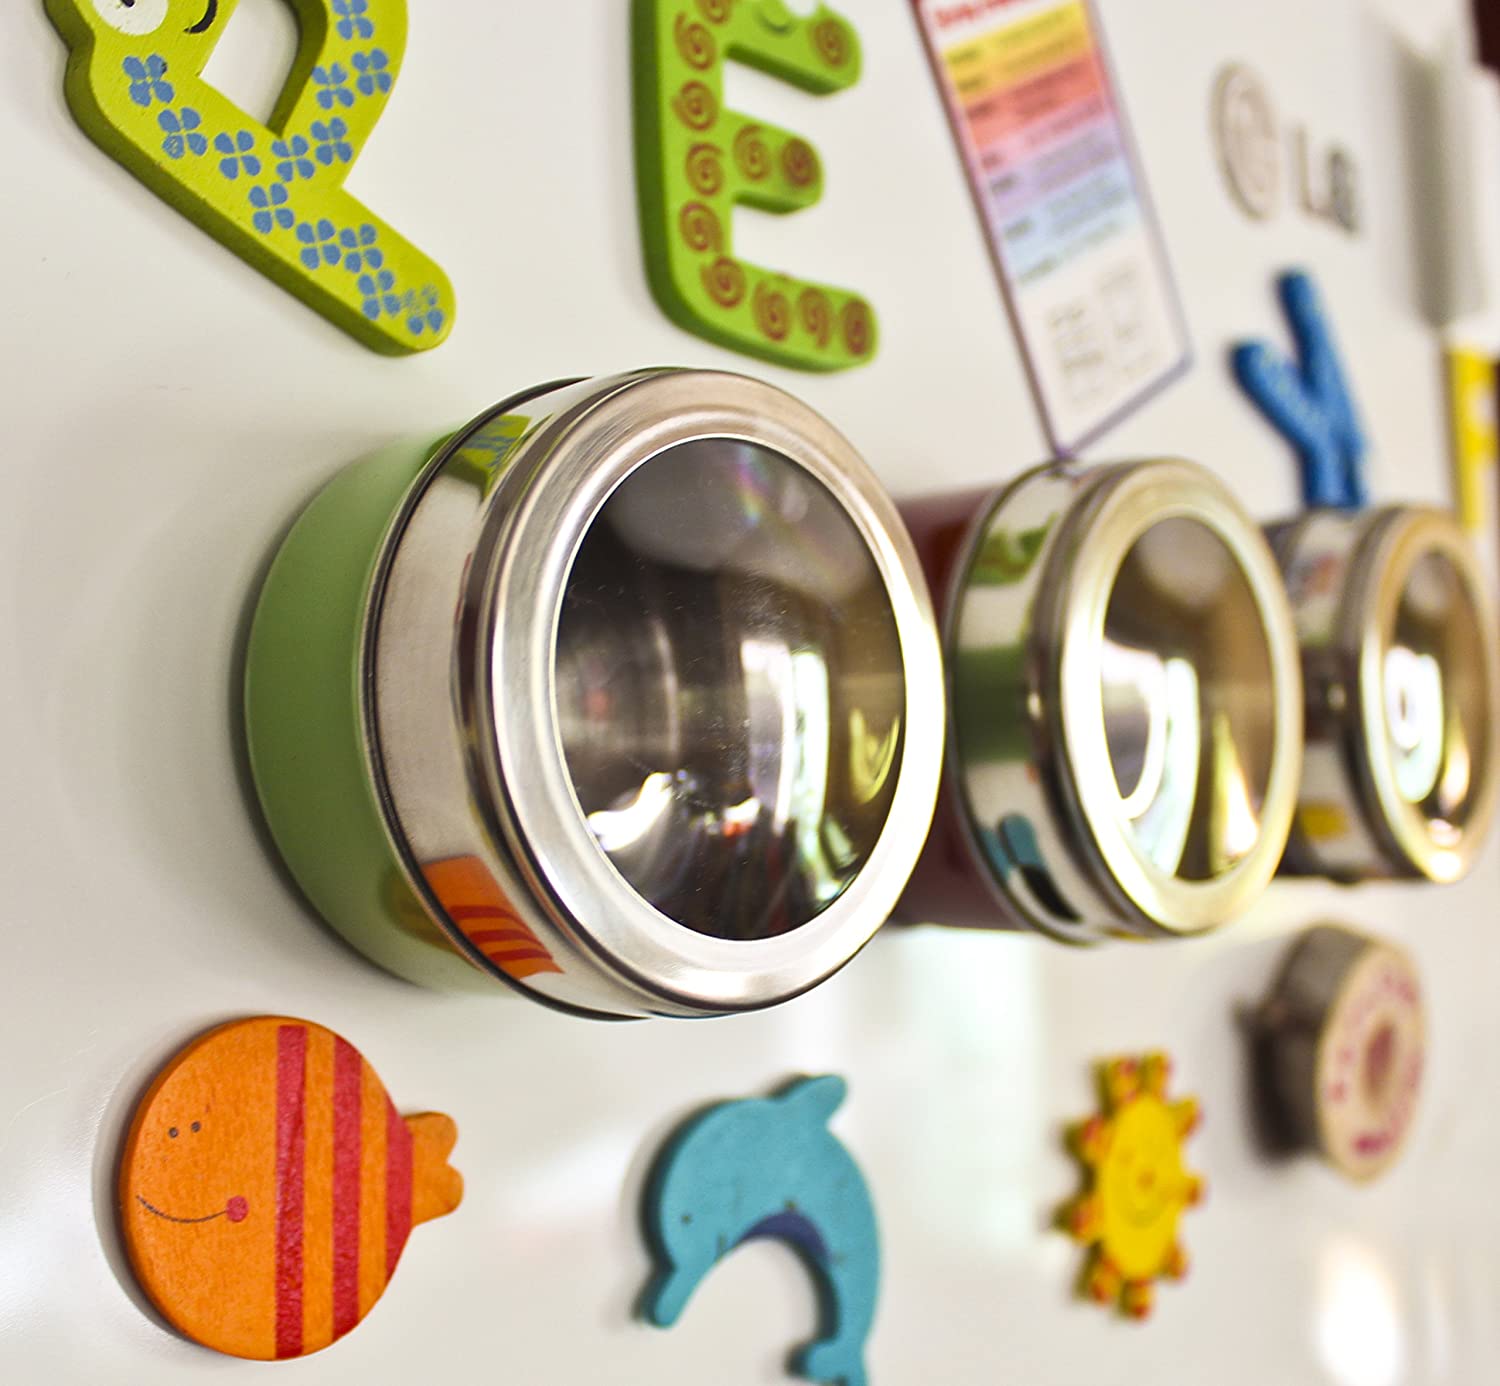 Using magnets for spice racks, knives and cookware can reduce rattling